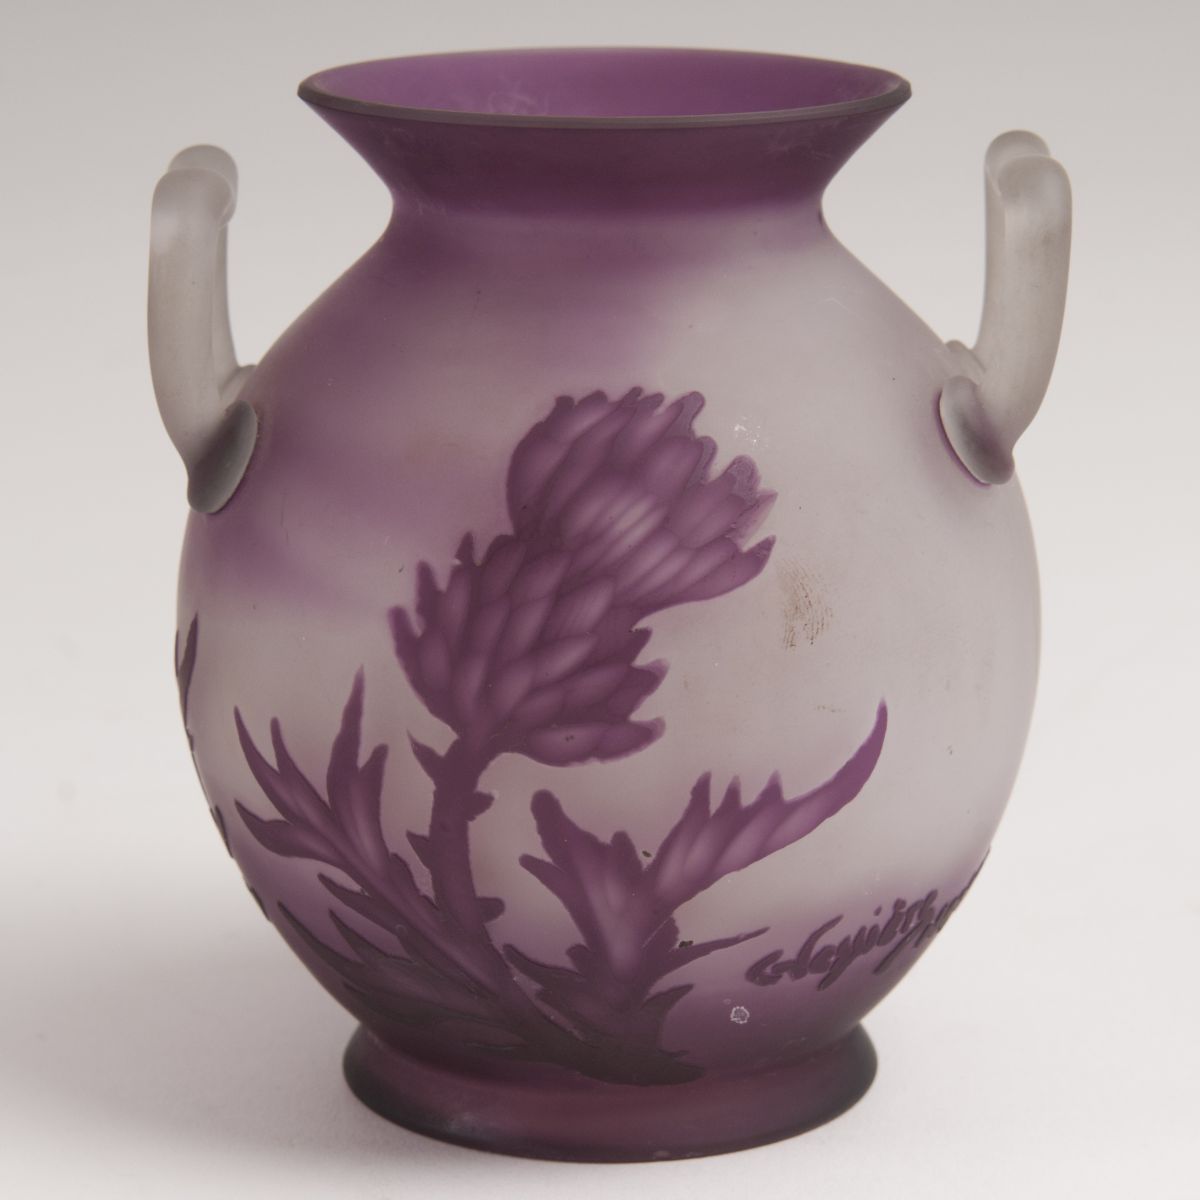 A Small Double Art-nouveau Vase with Thistles - image 2